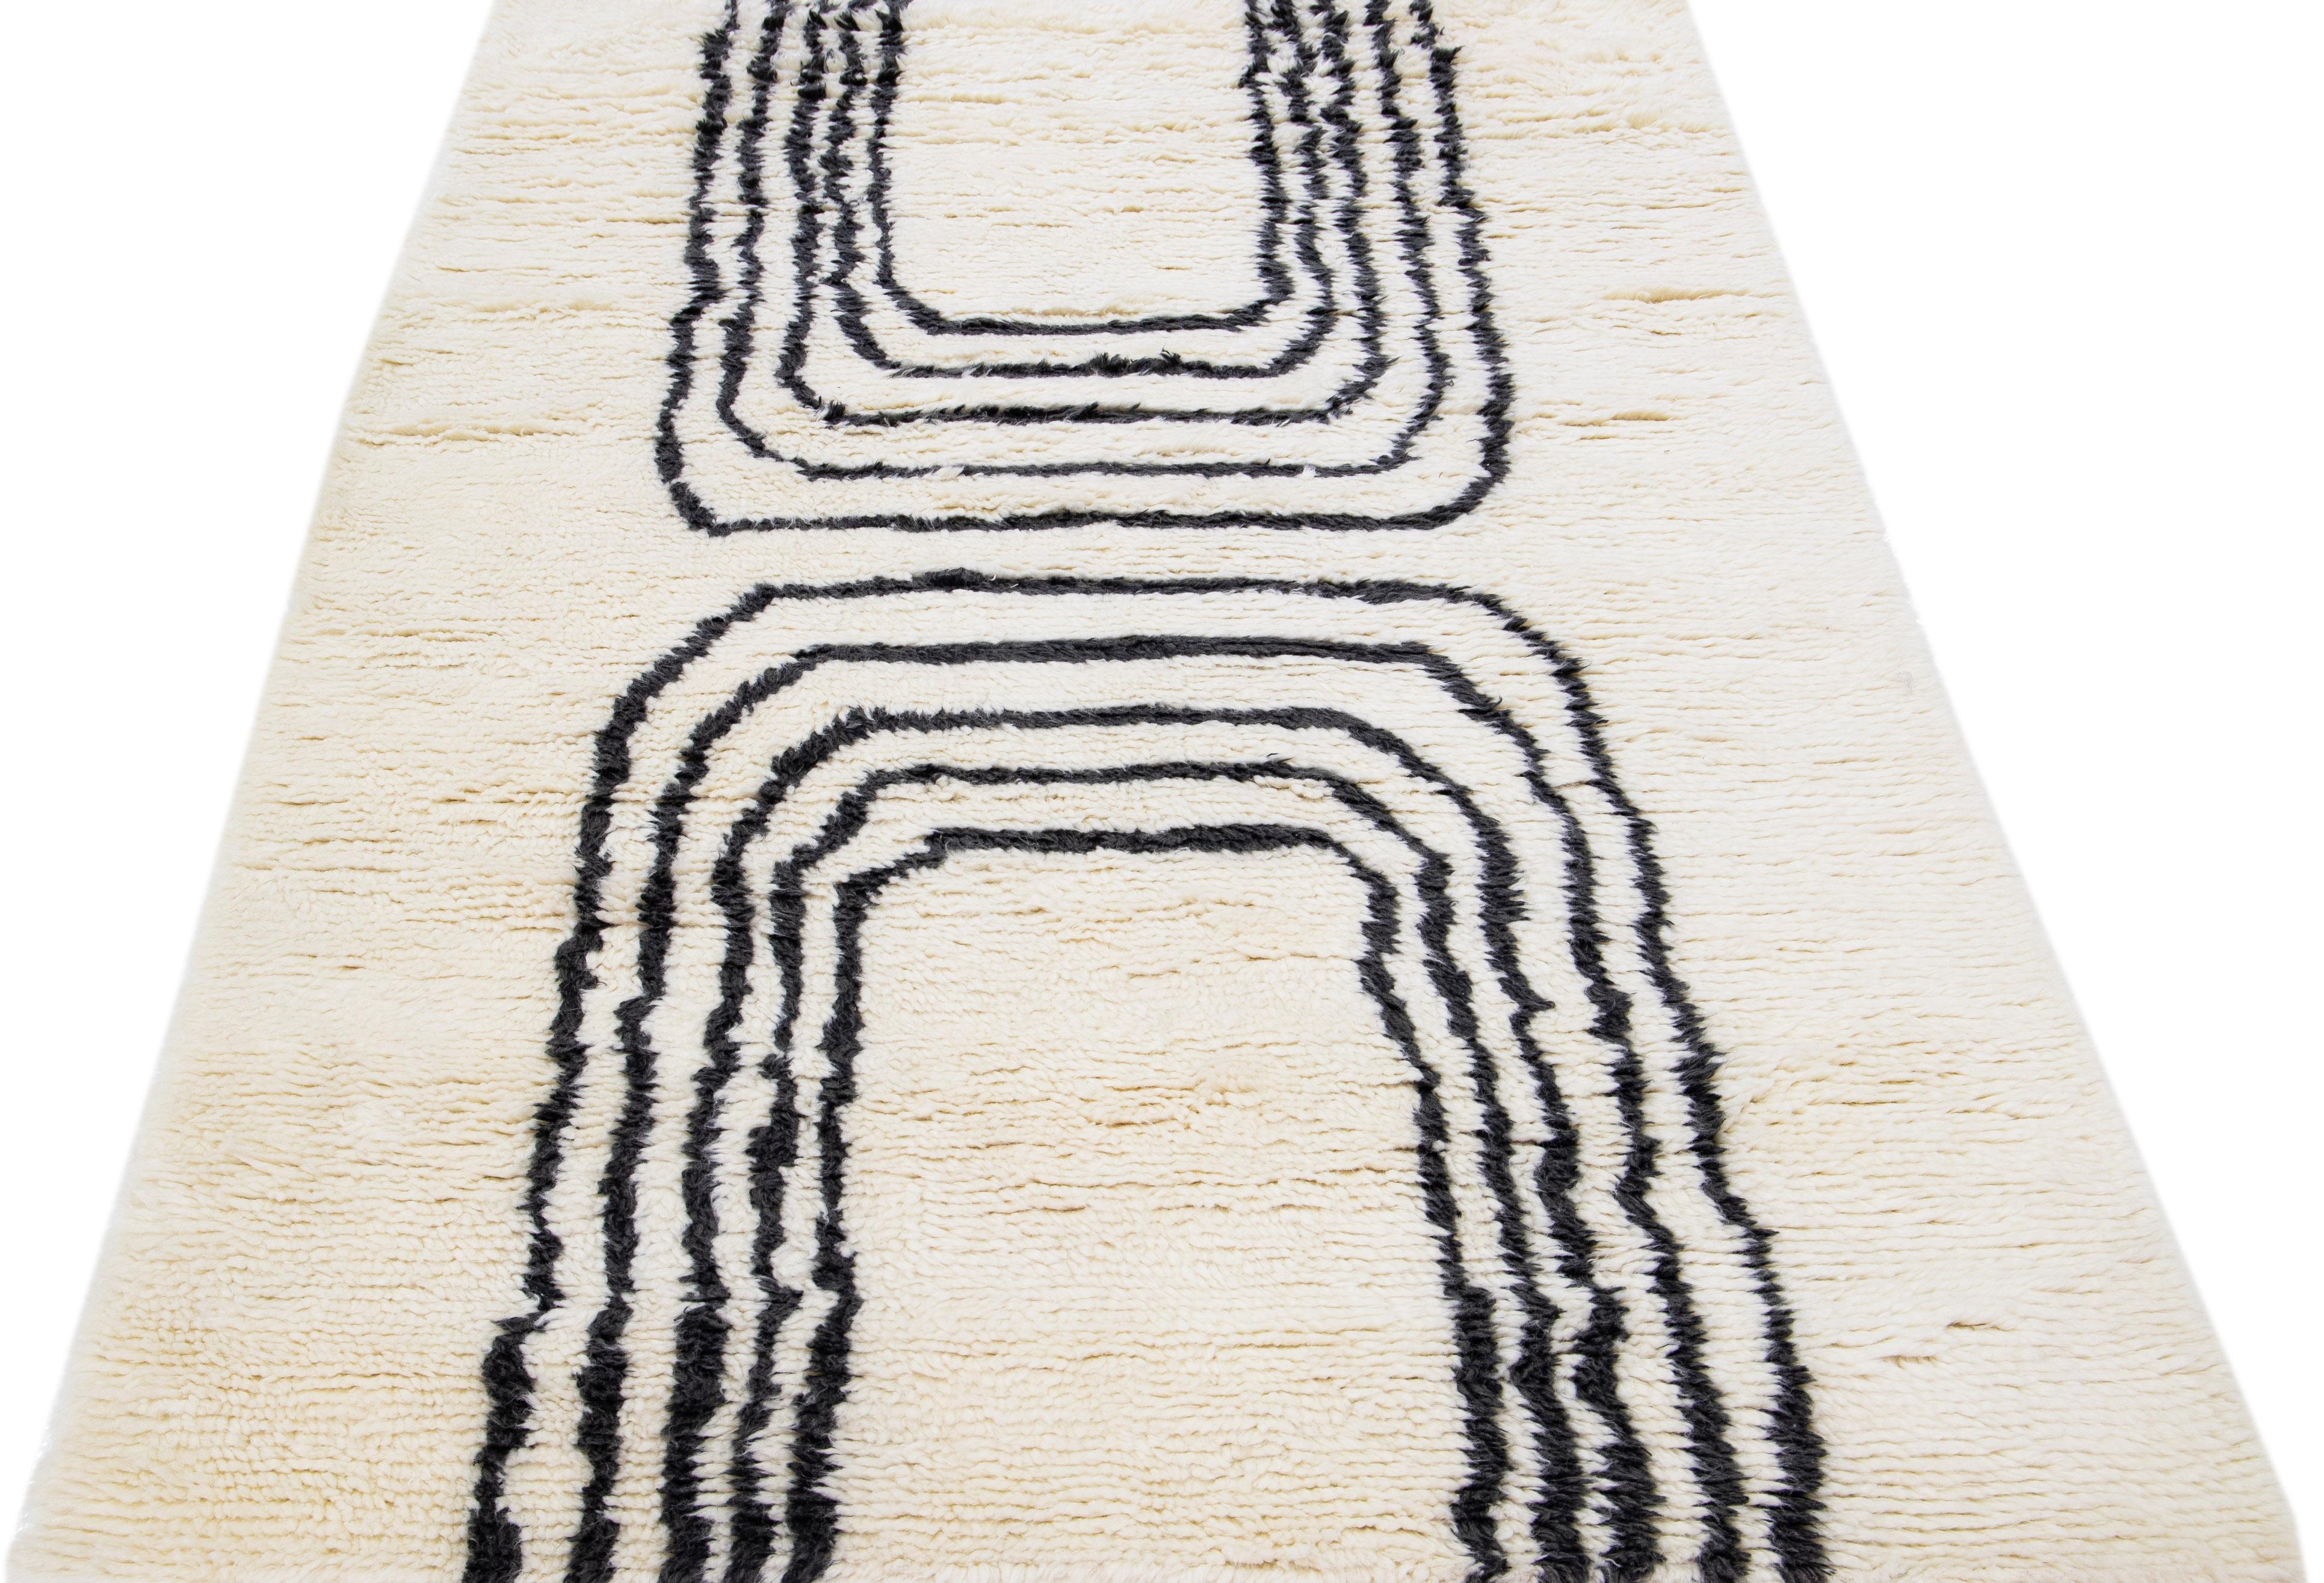 Beautiful modern Moroccan-style hand-knotted wool rug with an ivory field. This rug is part of our Apadana's Safi Collection and features a minimalist design in gray-charcoal color.

This rug measures: 5' x 8'.

Our rugs are professional